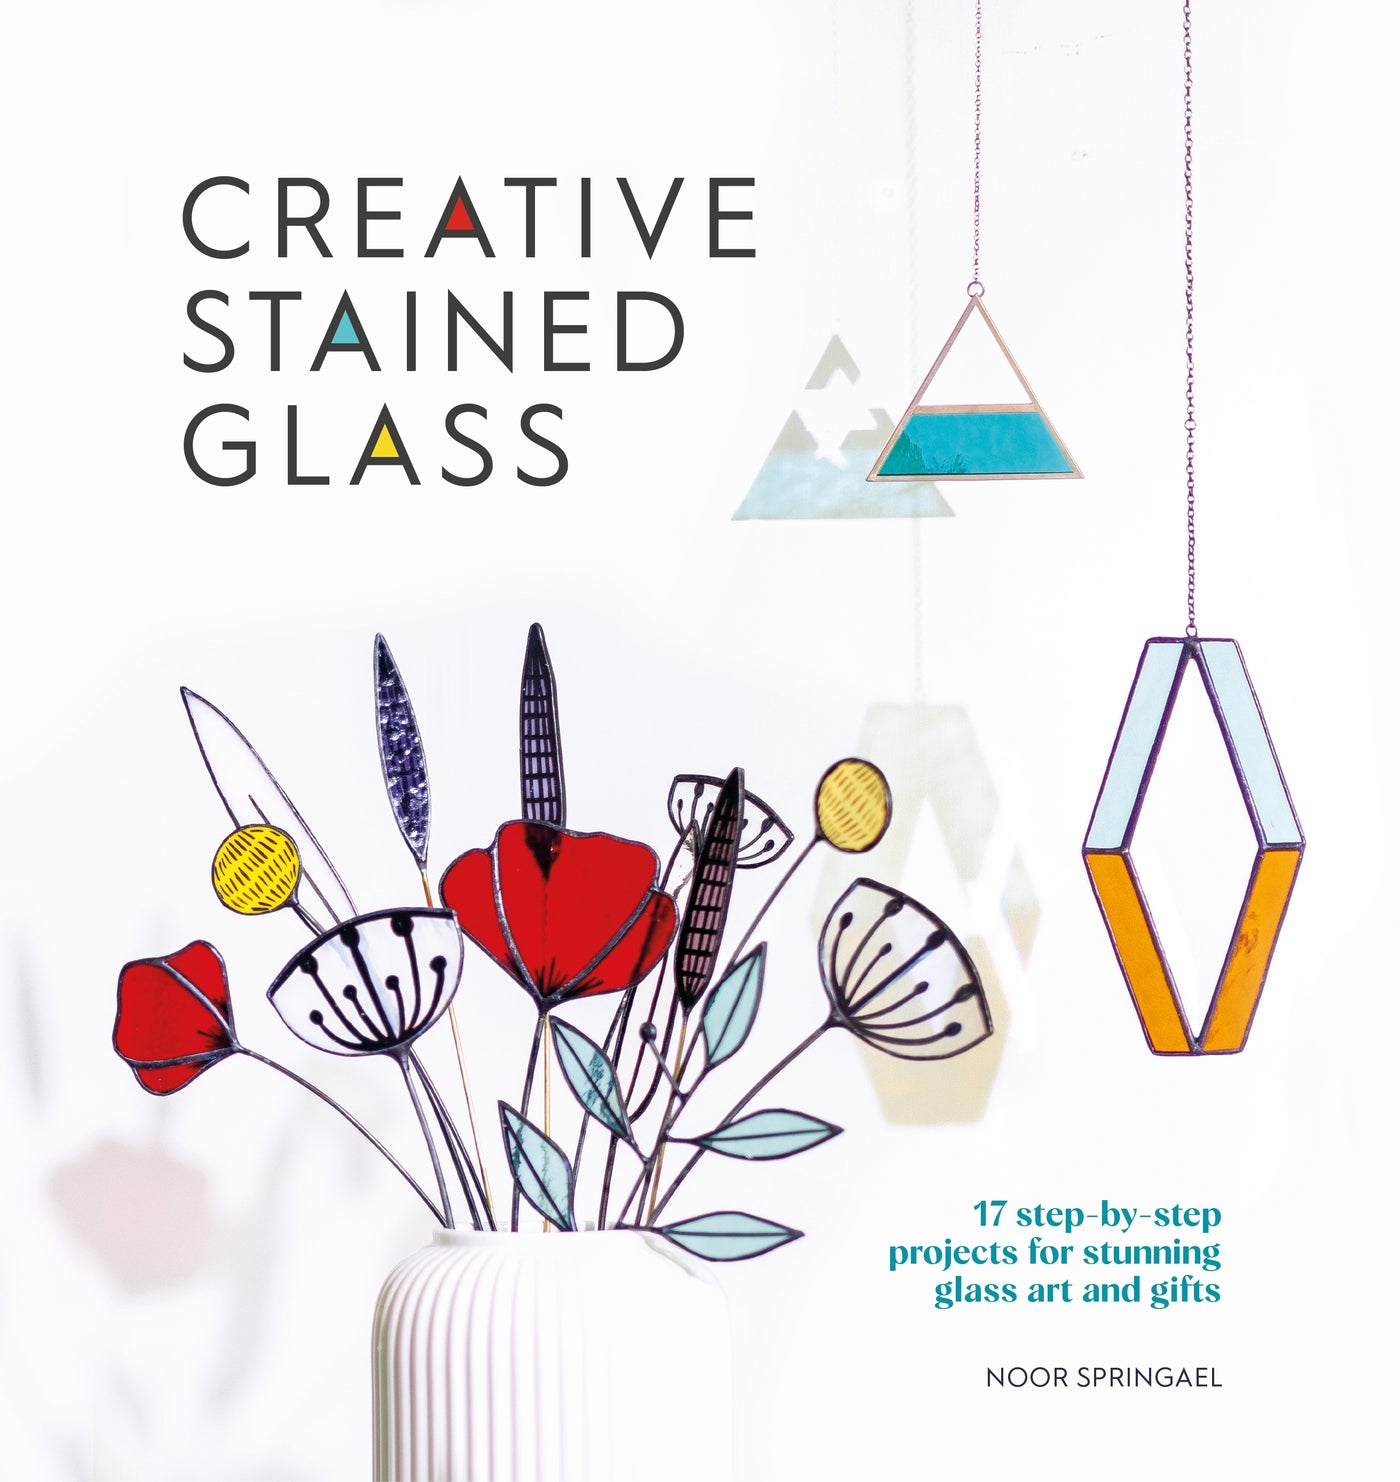 Creative Stained Glass 17 step-by-step projects for stunning glass art and gifts